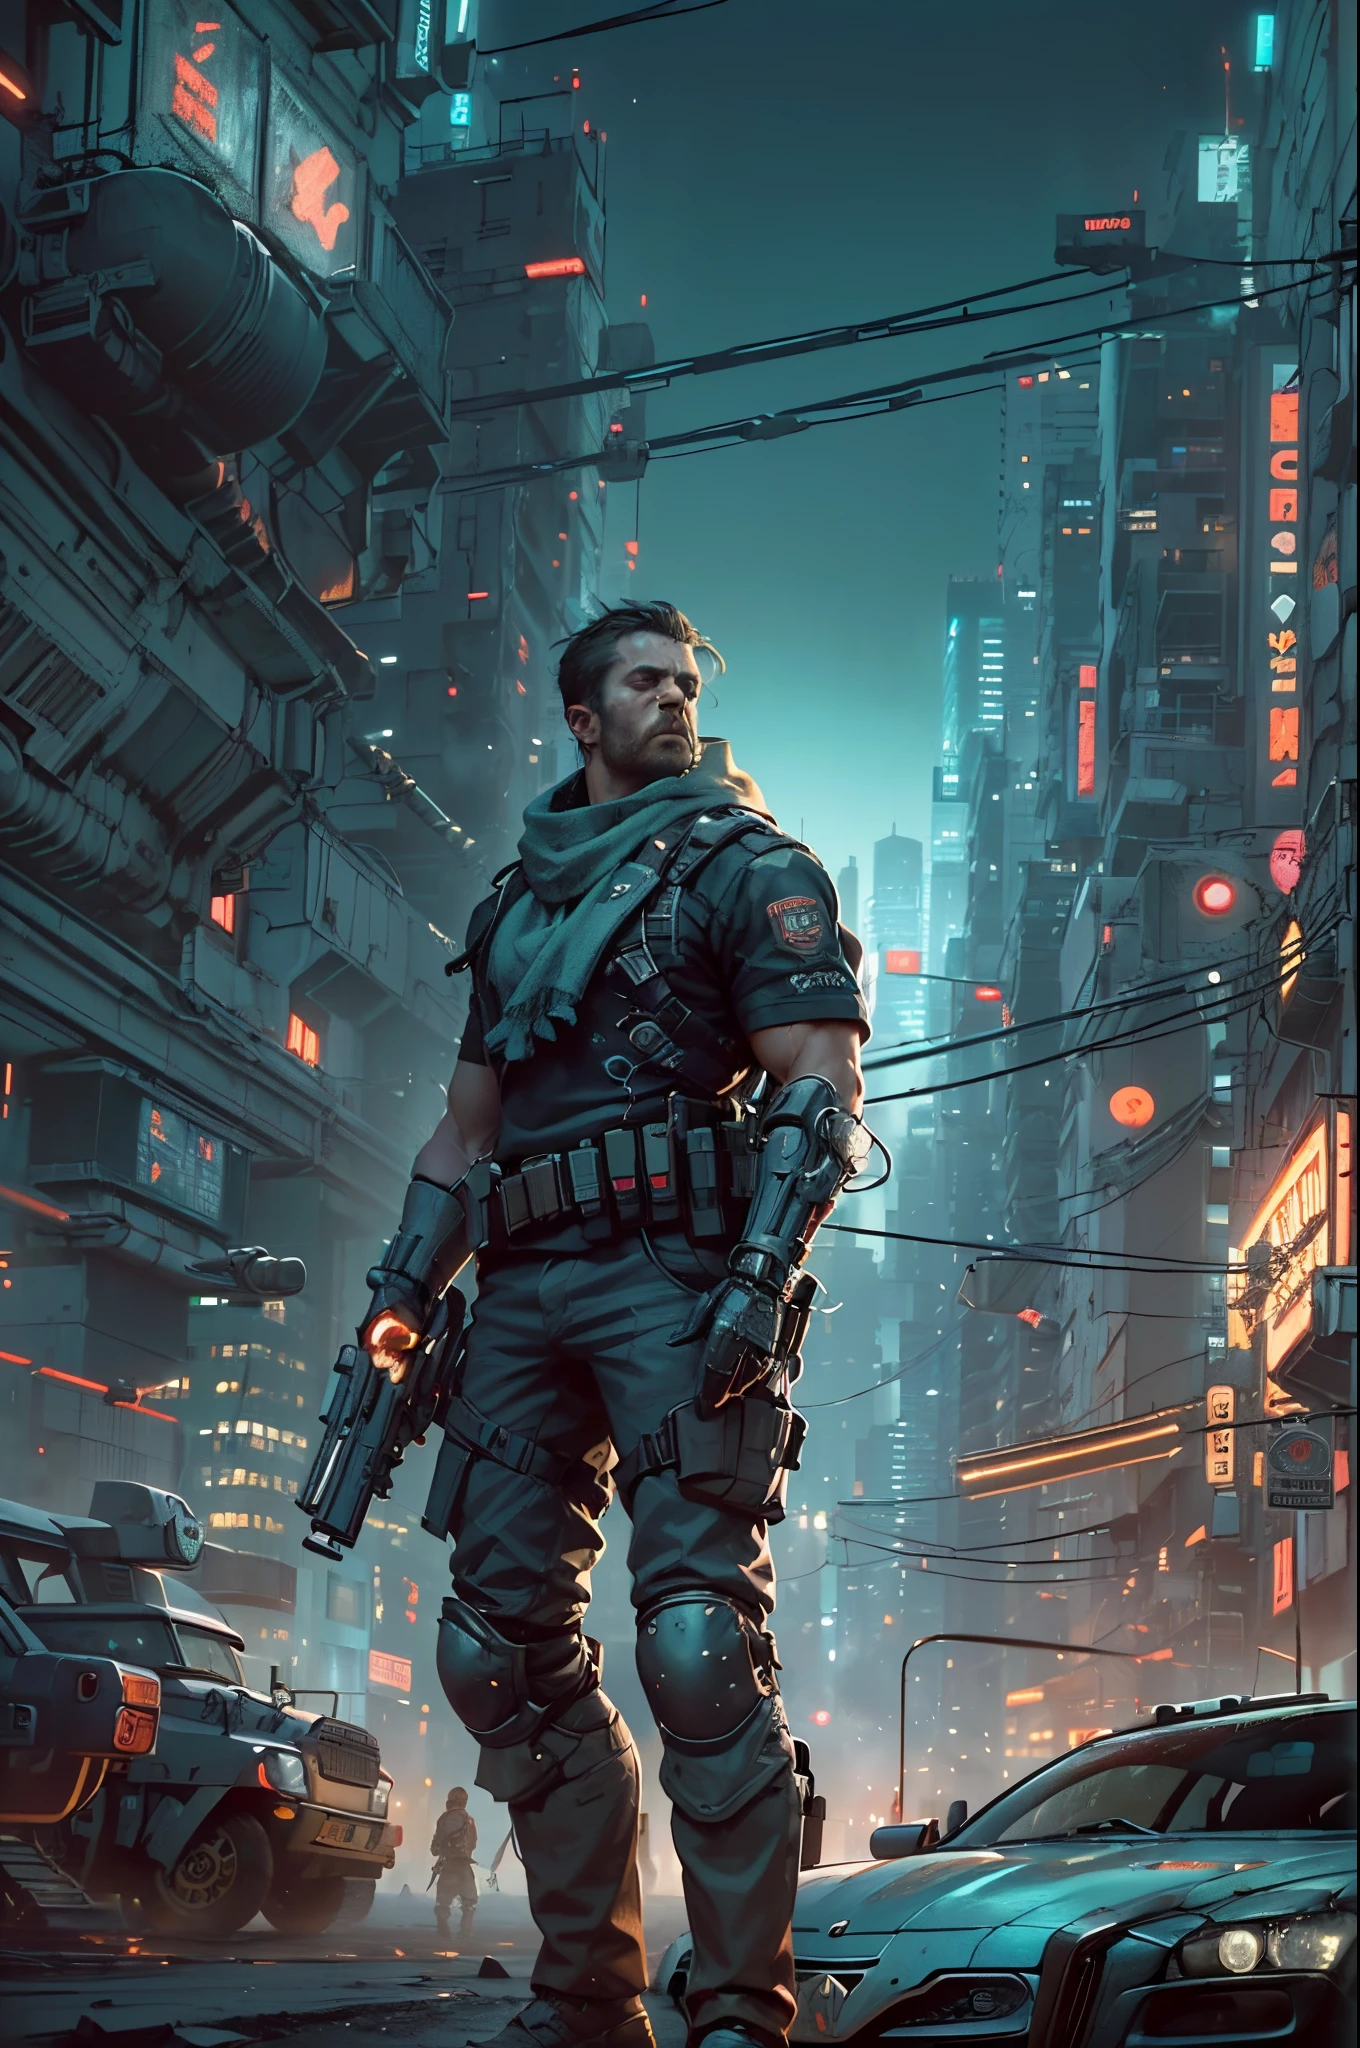 （(Multiple award-winning works, With incredible details, textures and maximum detail，(フォトリアリスティック))），(((Use cyberpunk style to depict a future war，Humanity&#39;s Holy War，)))，early evening，The setting sun slopes to the west，Lazy muscular heavy soldier yawning while standing next to LunarPunkAI sports car，in the shadows beside him，Hidden a reelmech girl，She is preparing to sneak attack the heavily armored soldiers。（(Handsome young boy，))，((Tall, well-proportioned middle-aged man))，heavy look， (Anatomically correct limbs and physique:1.5), (Anatomically correct perspective and occlusion：1.5)，(Gender characteristics are very obvious：1.5)，(correct faces), wide angles，(((Correct ratio of people to vehicles：1.6)))，((Add some scenes：trench，Arsenal，lots of gunoon Night，Huge full moon，bedazzled，cyberpunk city landscape, skyscrapper, ))， (Complicated details:1.1), the complex background))， ((Bright and vivid color scheme：1.7))，((dynamic viewing angle+dynamic combination))，